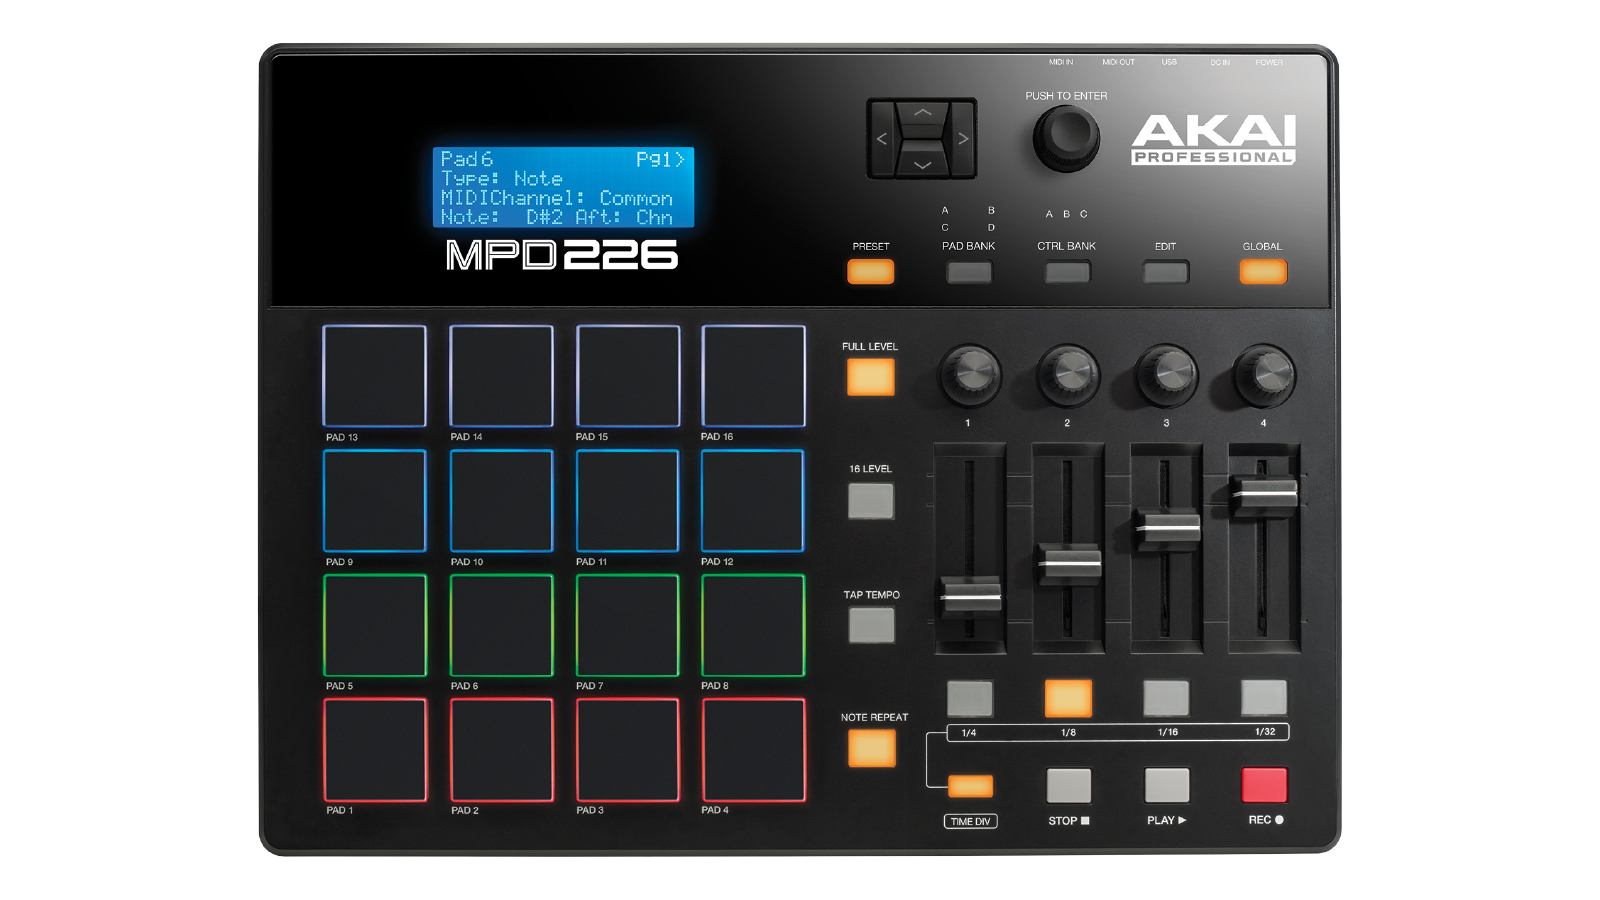 AKAI MPD226 - Feature-Packed, Highly Playable Pad Controller